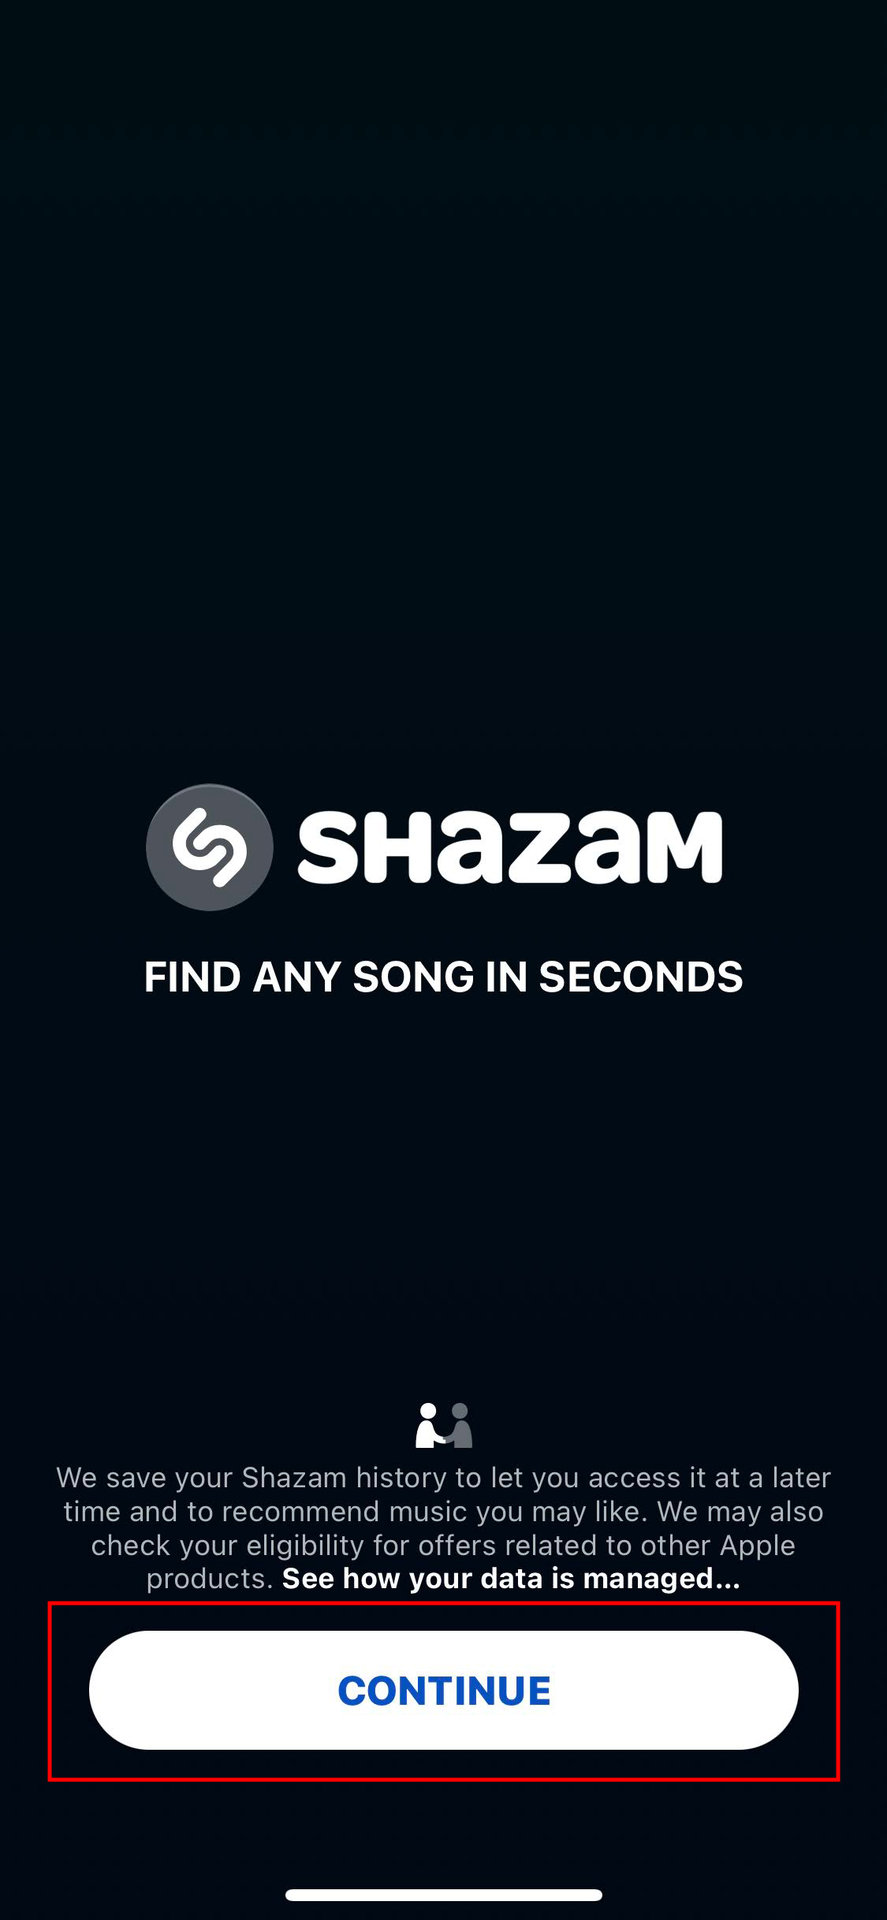 How to redeem free Apple Music from Shazam 2